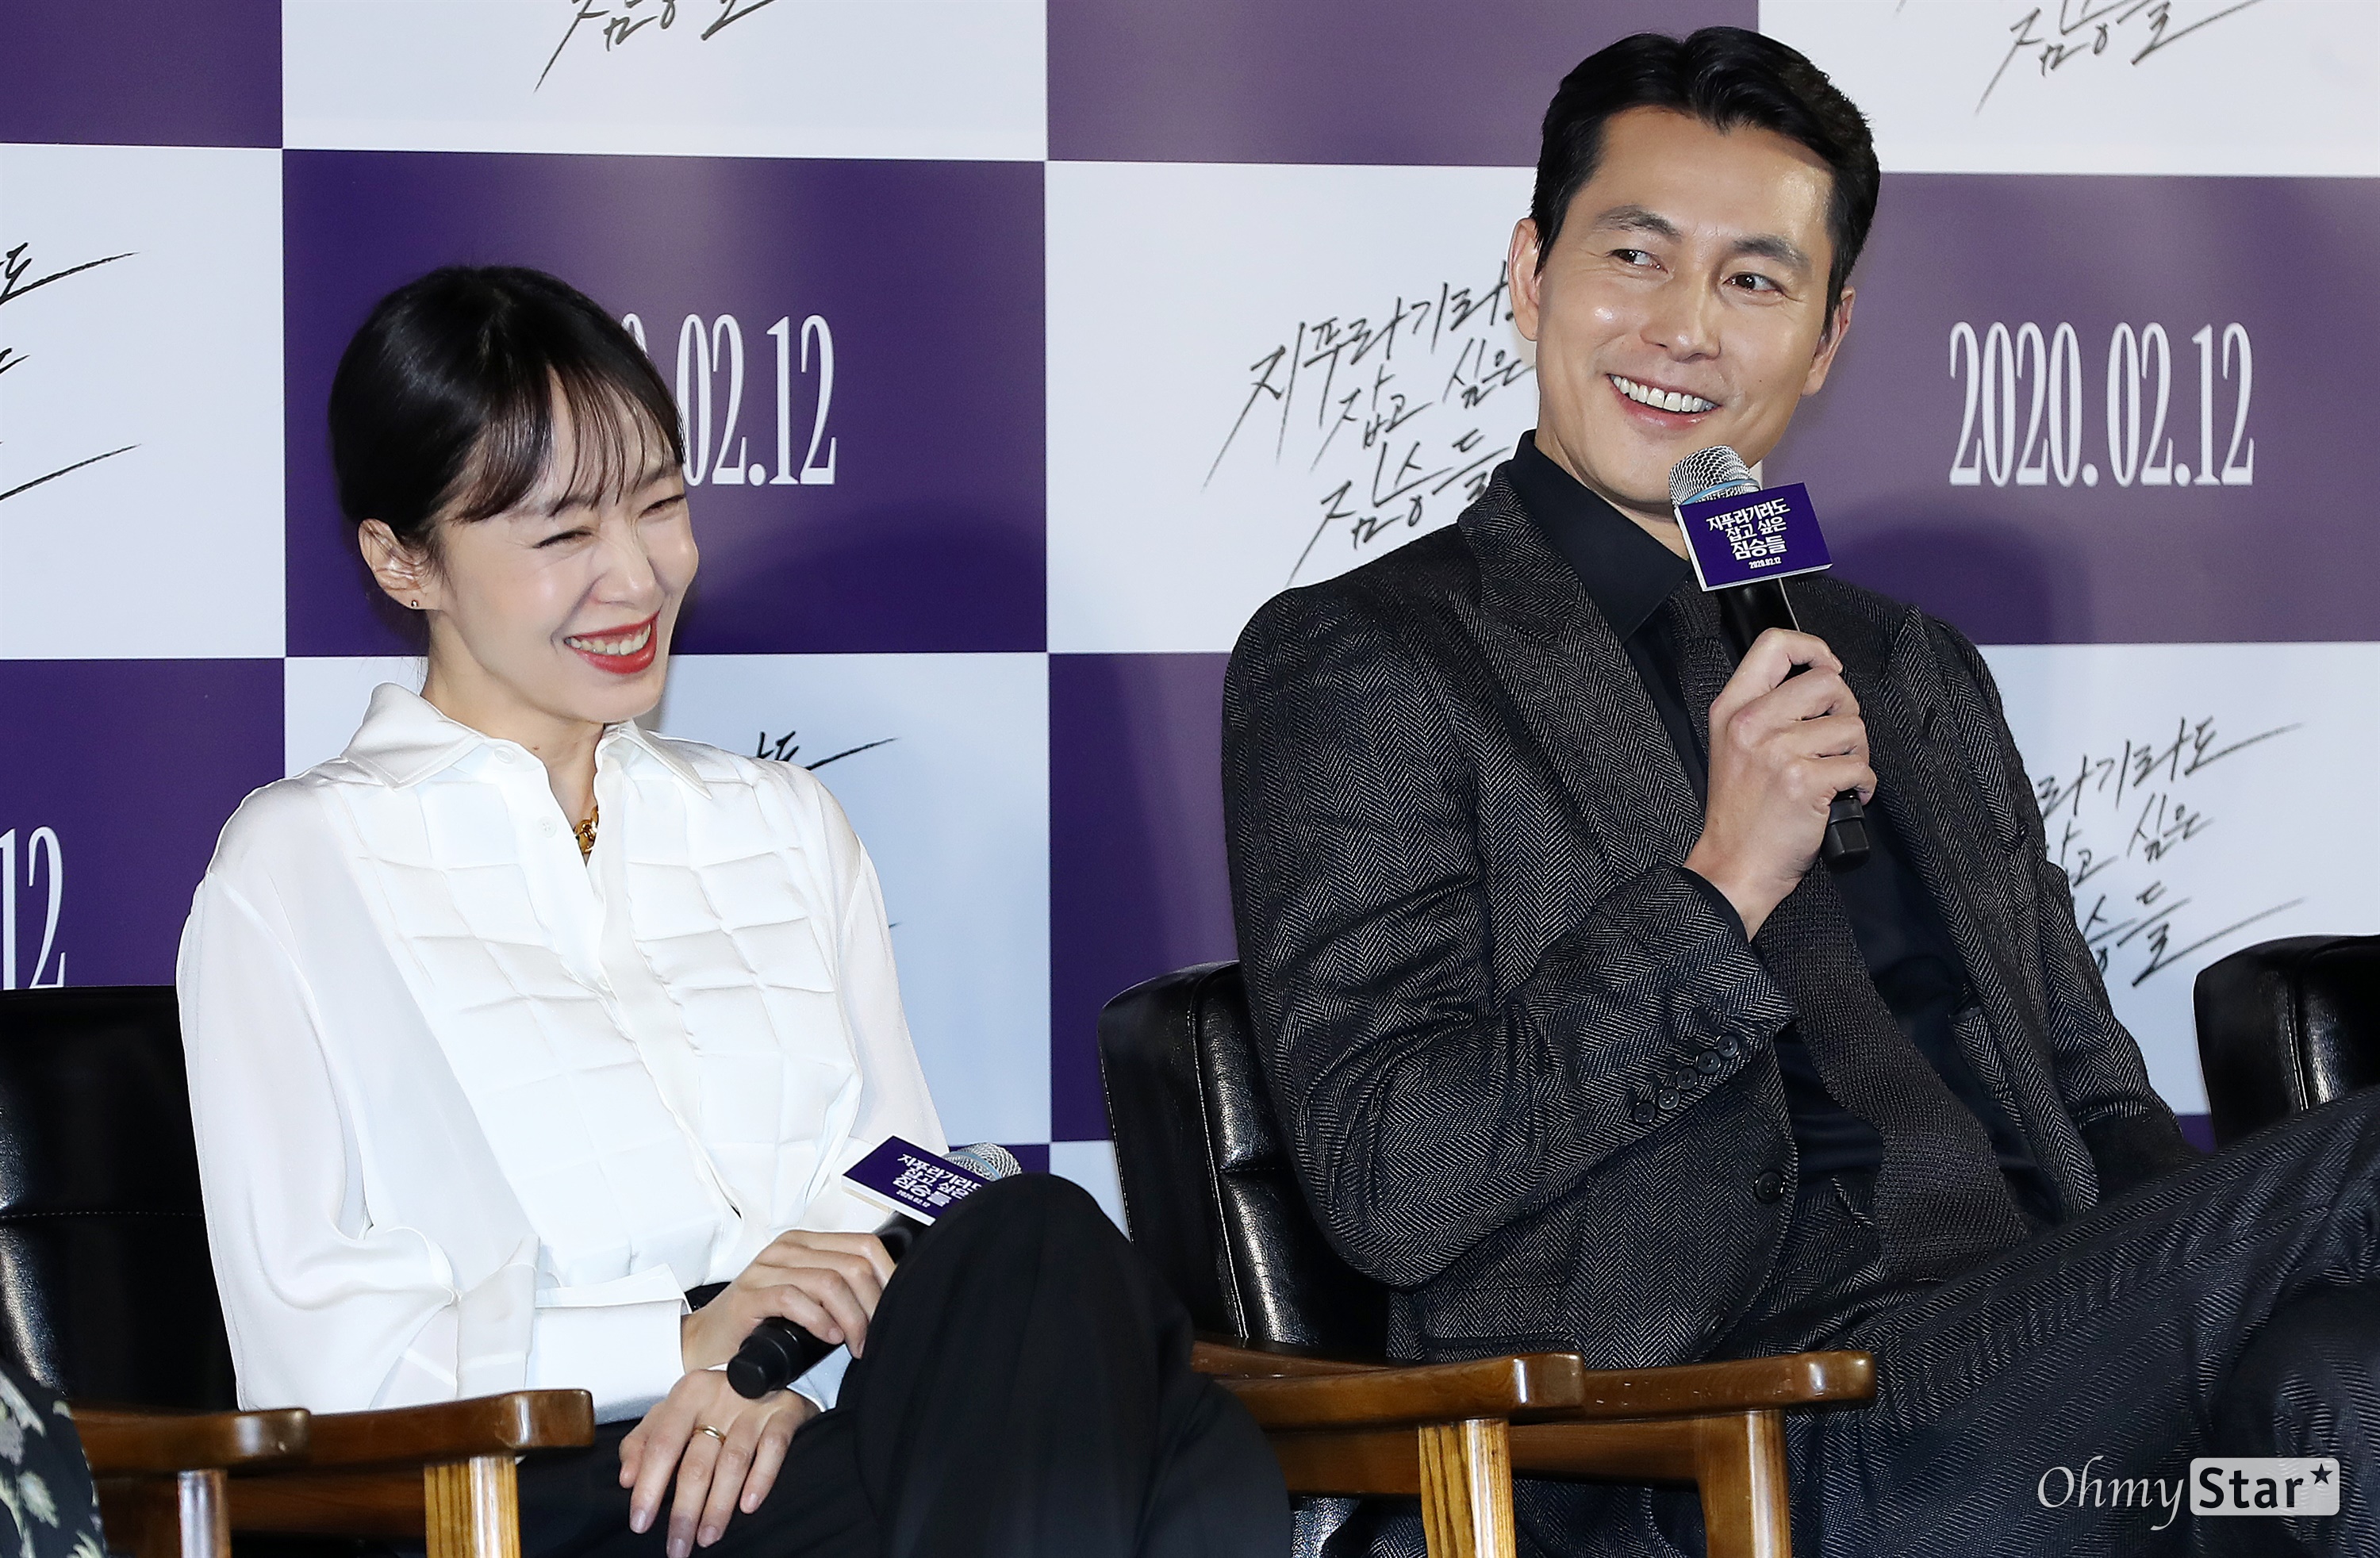 On the morning of the 13th, the production briefing session of the movie The Animals Wanting to Hold the Jeep was held at Megabox Seongsu, Seongdong-gu, Seoul.On the day, director Kim Yong-hoon, Actor Youn Yuh-jung (Soonja station), Jeon Do-yeon (Michelle Chen station), Jung Woo-sung (Taeyoung station), Shin Hyun-bin (Miran station), and Jeong Garam (Jintae station) attended the event.The film tells the stories of ordinary people struggling to take on money bags.Director Kim Yong-hoon, who directed the movie The Animals Who Want to Hold a Spray with the motif of the novel of the same name, said, The center of the story changes as each character takes over the story, not the story. He said.Jeon Do-yeon at Youn Yuh-jung, Jeon Do-yeon at Jung Woo-sungWhen Do Yeon-i did it, I just did it. (Youn Yuh-jung) I decided to appear because I wanted to be with Jeon Do-yeon.(Jung Woo-sung) said that Actor Youn Yuh-jung and Jung Woo-sung decided to appear in Because of the appearance of Jeon Do-yeon in a single voice.Jung Woo-sung of Taeyoung Station said, I felt like a friendly colleague because I watched Jeon Do-yeon through the movie from the beginning of my debut, but I decided to appear because I had never done my work together.I also found out that I had never worked with Jung Woo-sung in the field, said Jeon Do-yeon. I was sorry that it was over when I was getting used to each other because of the smoke breathing.Asked why he chose the work, Jeon Do-yeon said: Once the script was fun, the dramatic compositions, not the obvious crime, were fresh.As soon as he saw the character in the script, Actor Youn Yuh-jung came to mind, and Jeon Do-yeon immediately contacted Youn Yuh-jung and said he proposed to appear as a movie that teacher should do.I tried to play it naturally with the best of my strength because there were so strong Feelings on the character, said Jeon Do-yeon, who responded to the role of Michelle Chen, who played her role. I especially kept this part in mind because Michelle Chen, who is loved by a man, and Michelle Chen, who works as a bar president, is completely different.And the pressure of luxury casting.In the praise of the director, Youn Yuh-jung said, I often see a lot of cases where newcomers are really good at acting these days. I am fighting such a dilemma because I do not have such freshness.I think that the older I get, the better I want to smoke. Kim Yong-hoon said, The process of moving the unique story development method allowed only in novels to the movie was the biggest worry. It was important to give ordinary and common Feelings Especially, it was the biggest task for the production team to make Jung Woo-sung, which is a poisonous appearance, even if you try to put on the costume of old and old Feelings to express tired workers.Jung Woo-sung said, It is a dilemma of all the costume chiefs.The Movie The Animals Want to Hold the Spray Production Briefing Session